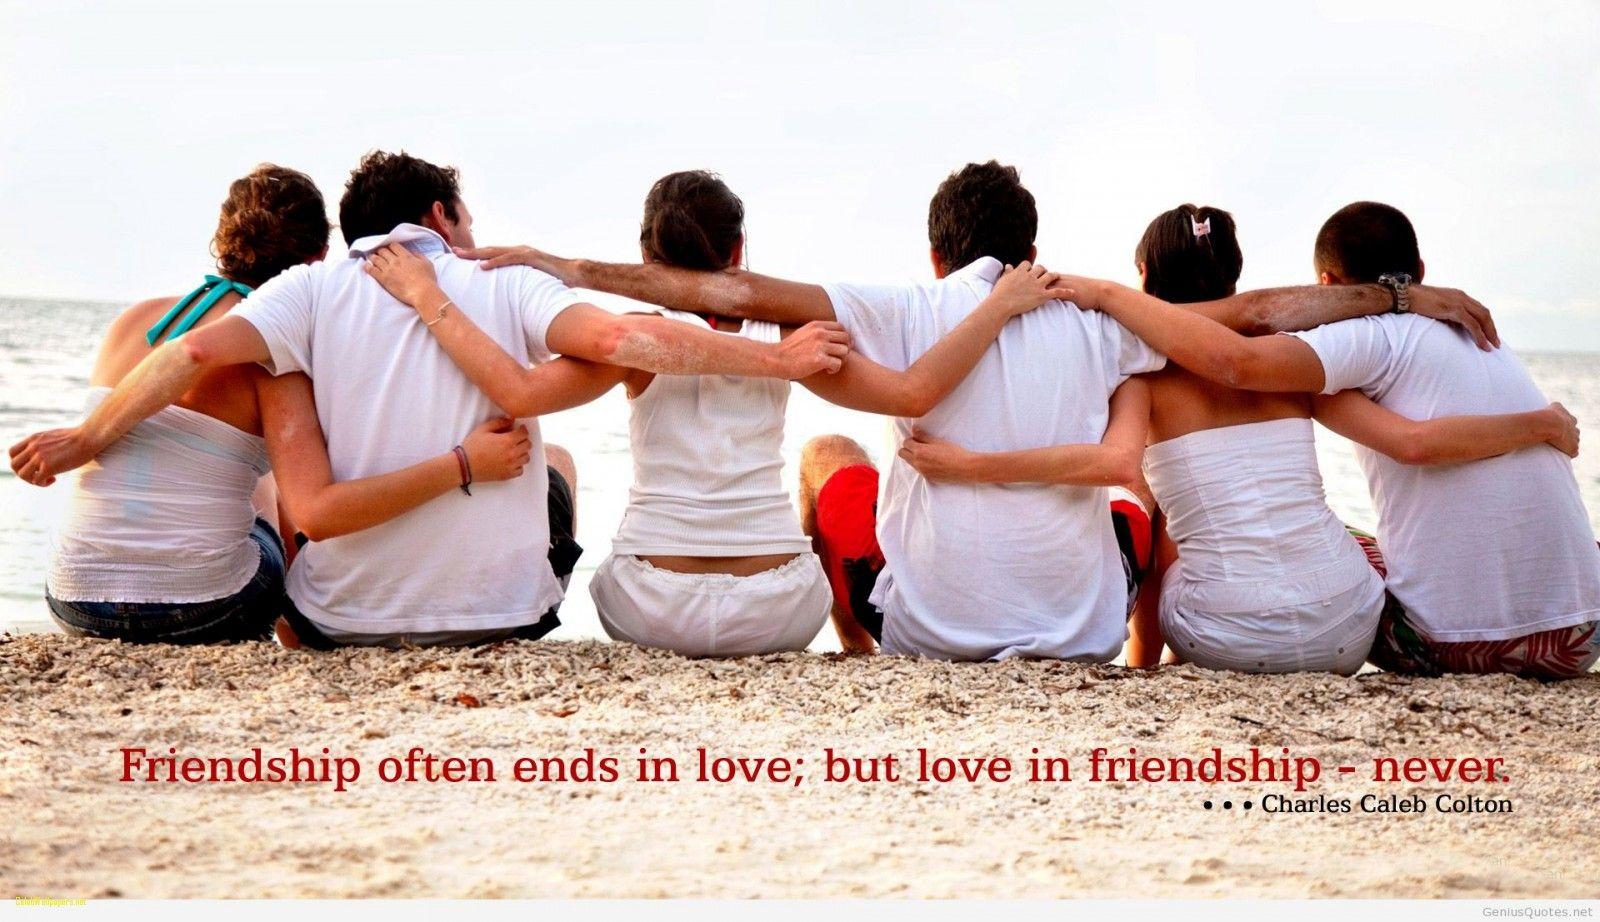 Friendship Wallpaper Best Friends forever Quotes Image and Friends